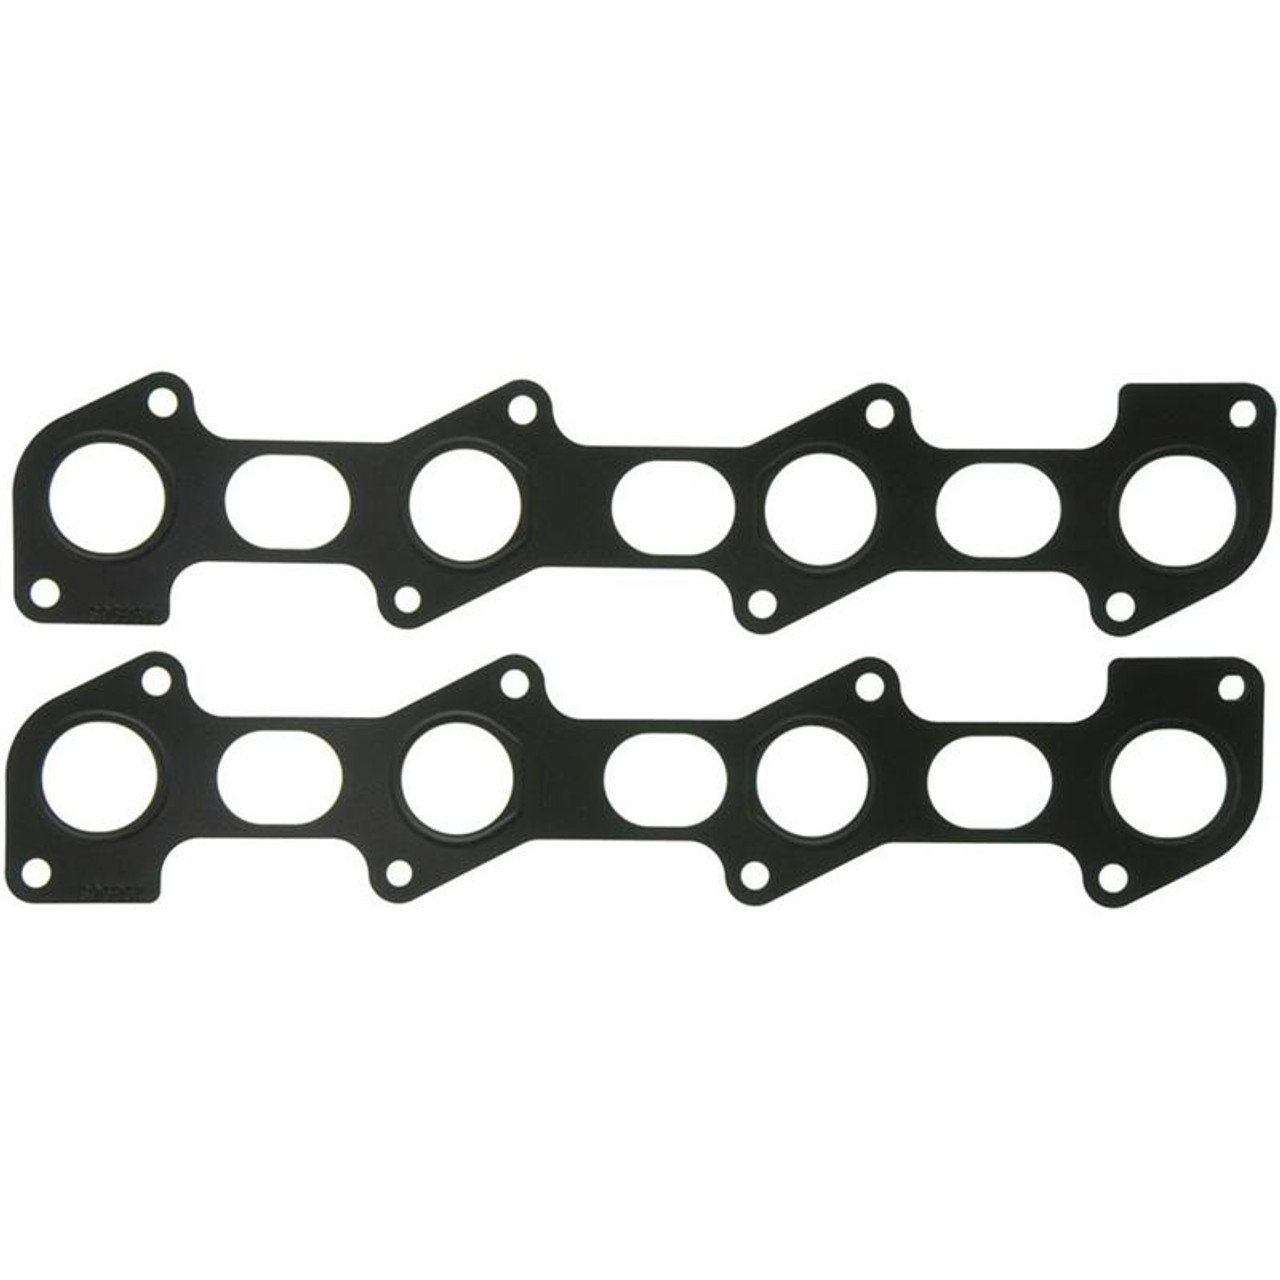 MAHLE EXHAUST MANIFOLD GASKET SET MS19312 2003-2007 FORD 6.0L POWERSTROKE